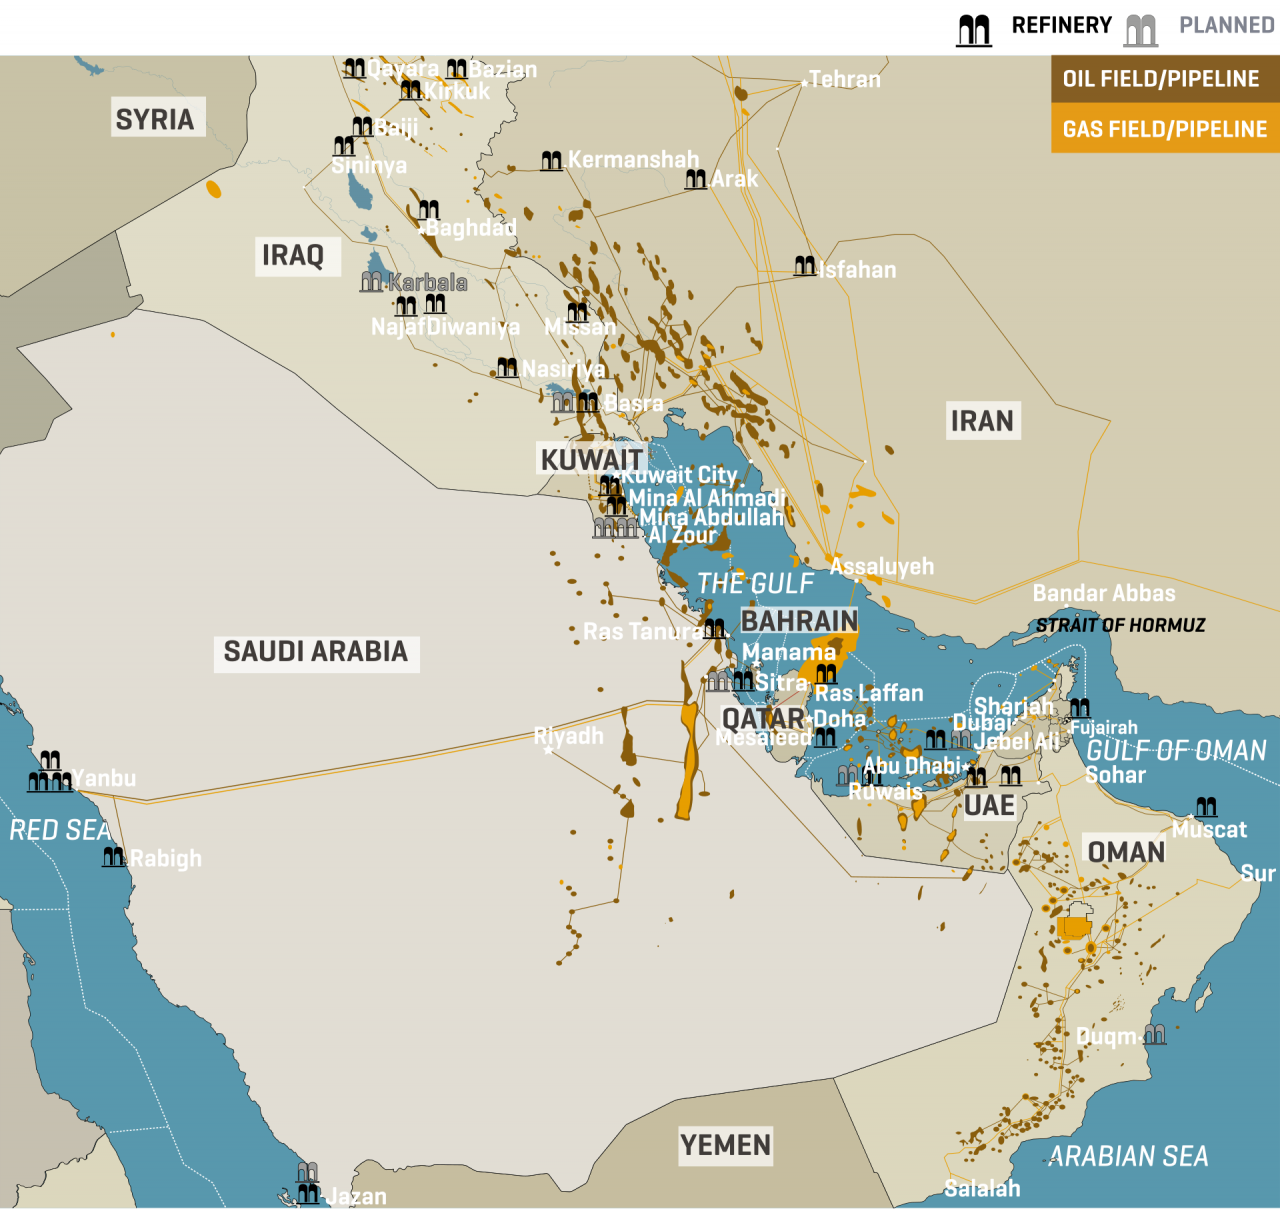 Middle East Oil Refineries